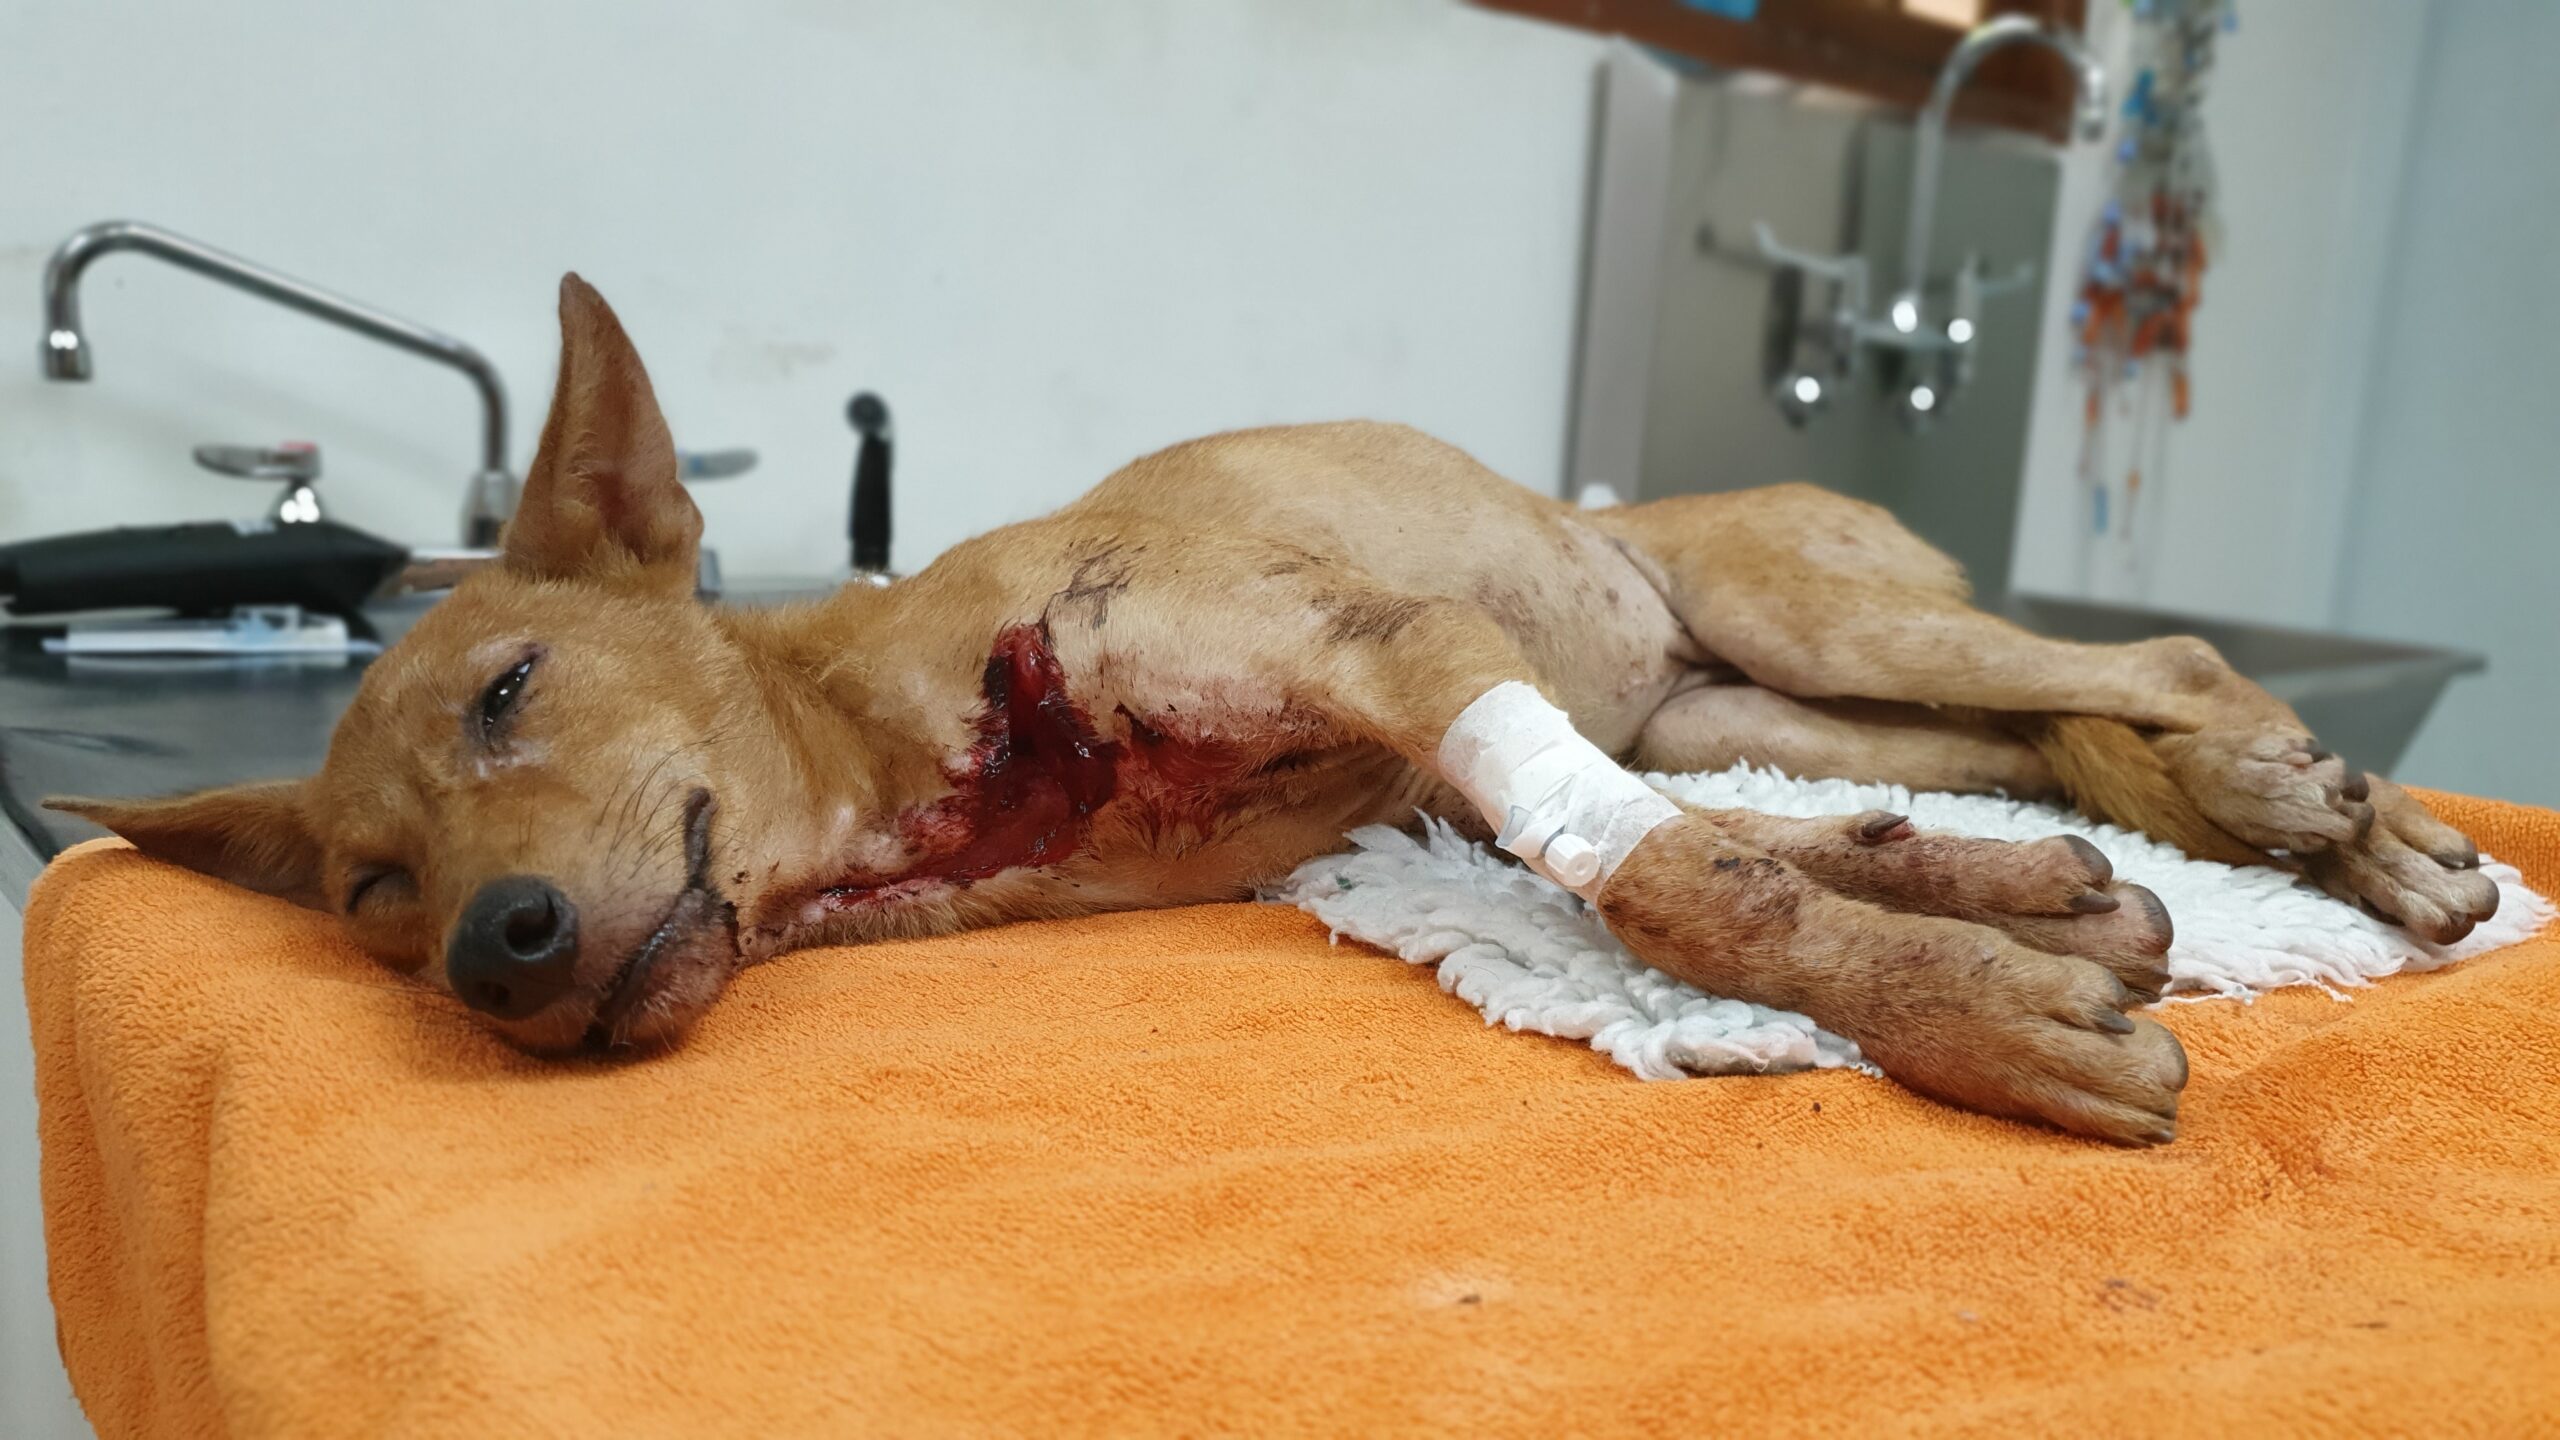 Mathilda, a Sri Lankan dog who came to WECare with a knife wound